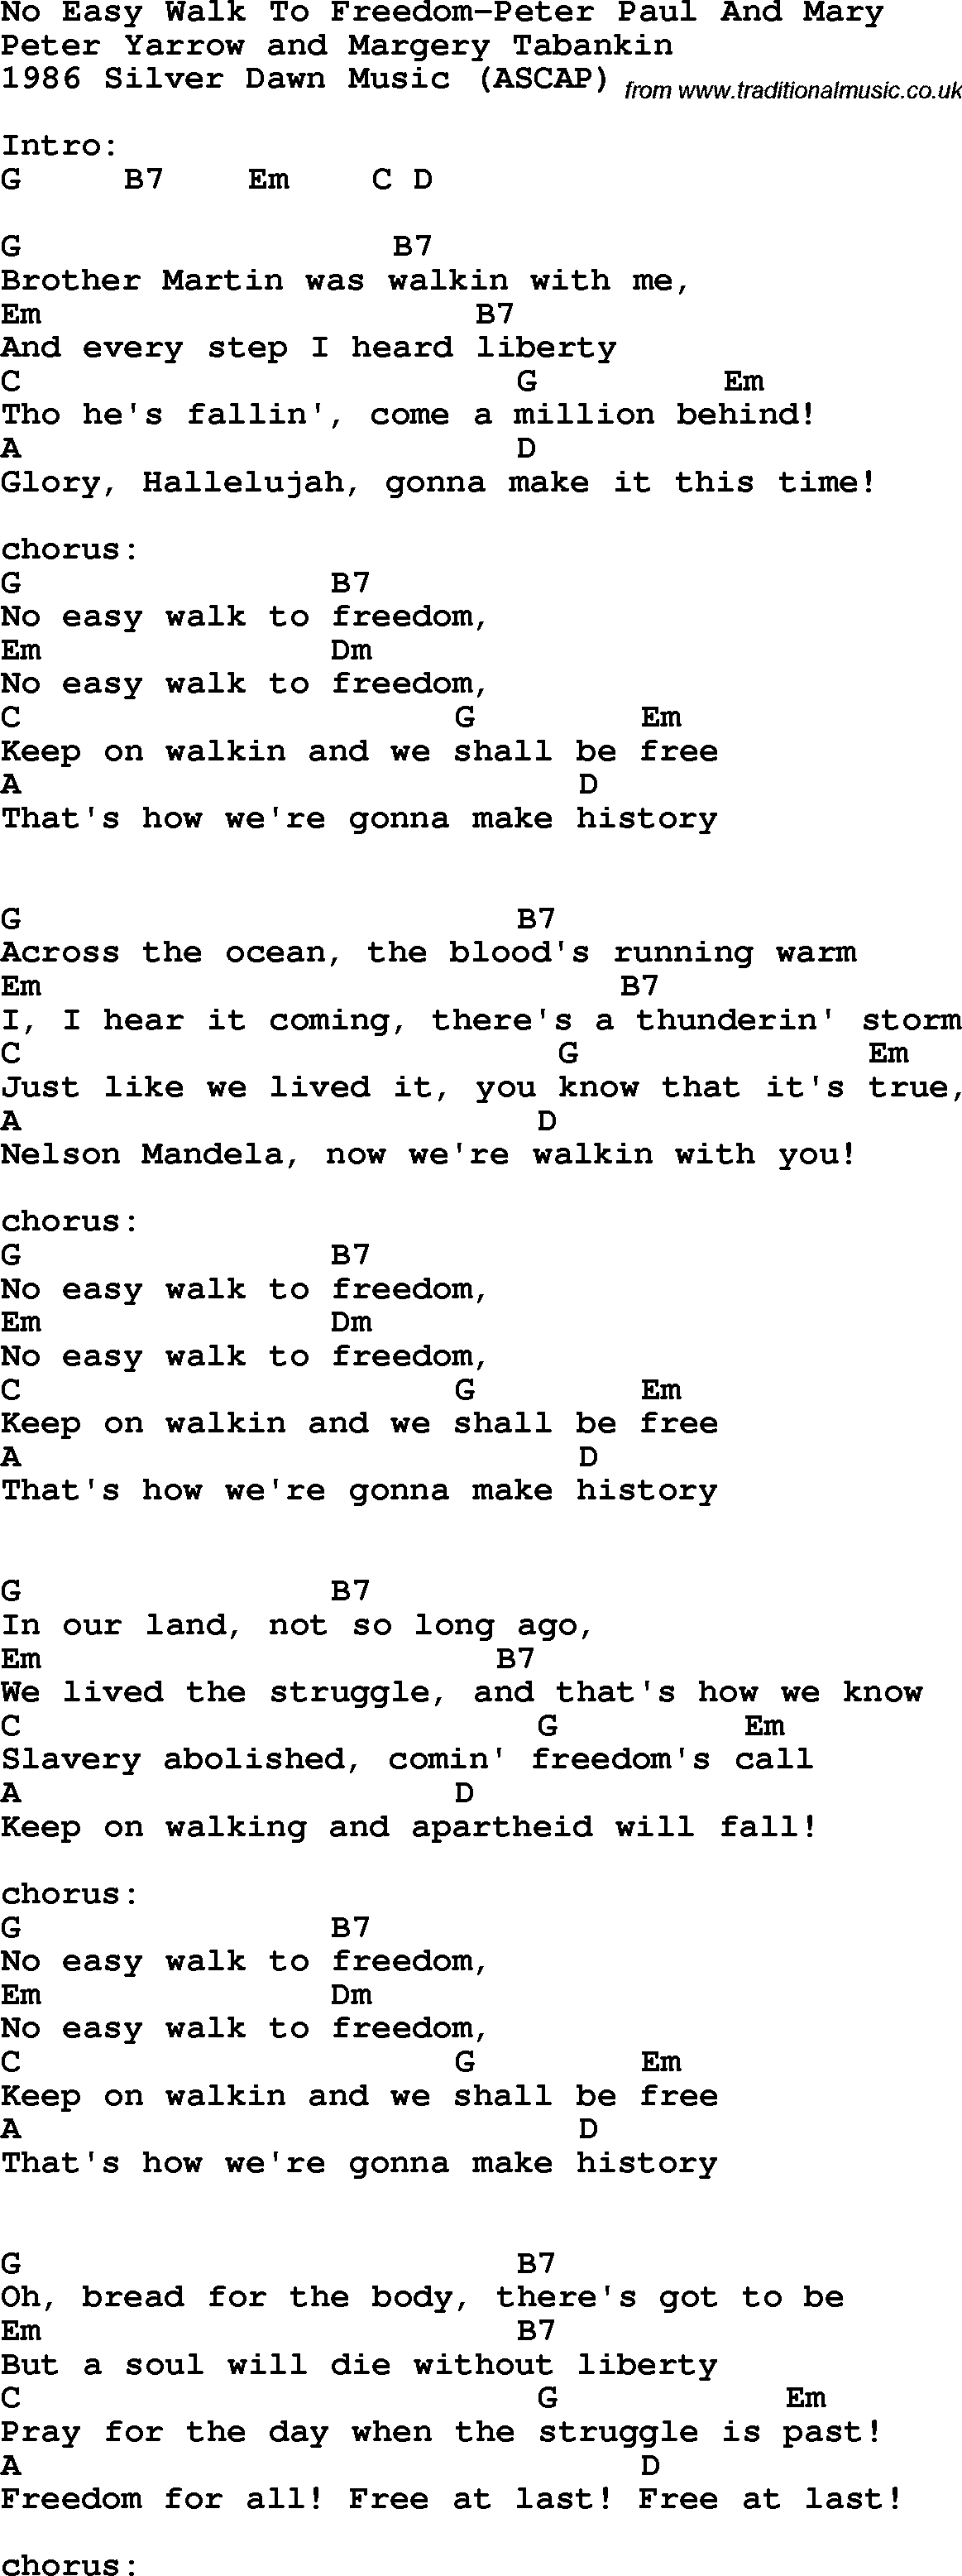 Protest Song No Easy Walk To Freedom-Peter Paul And Mary lyrics and chords